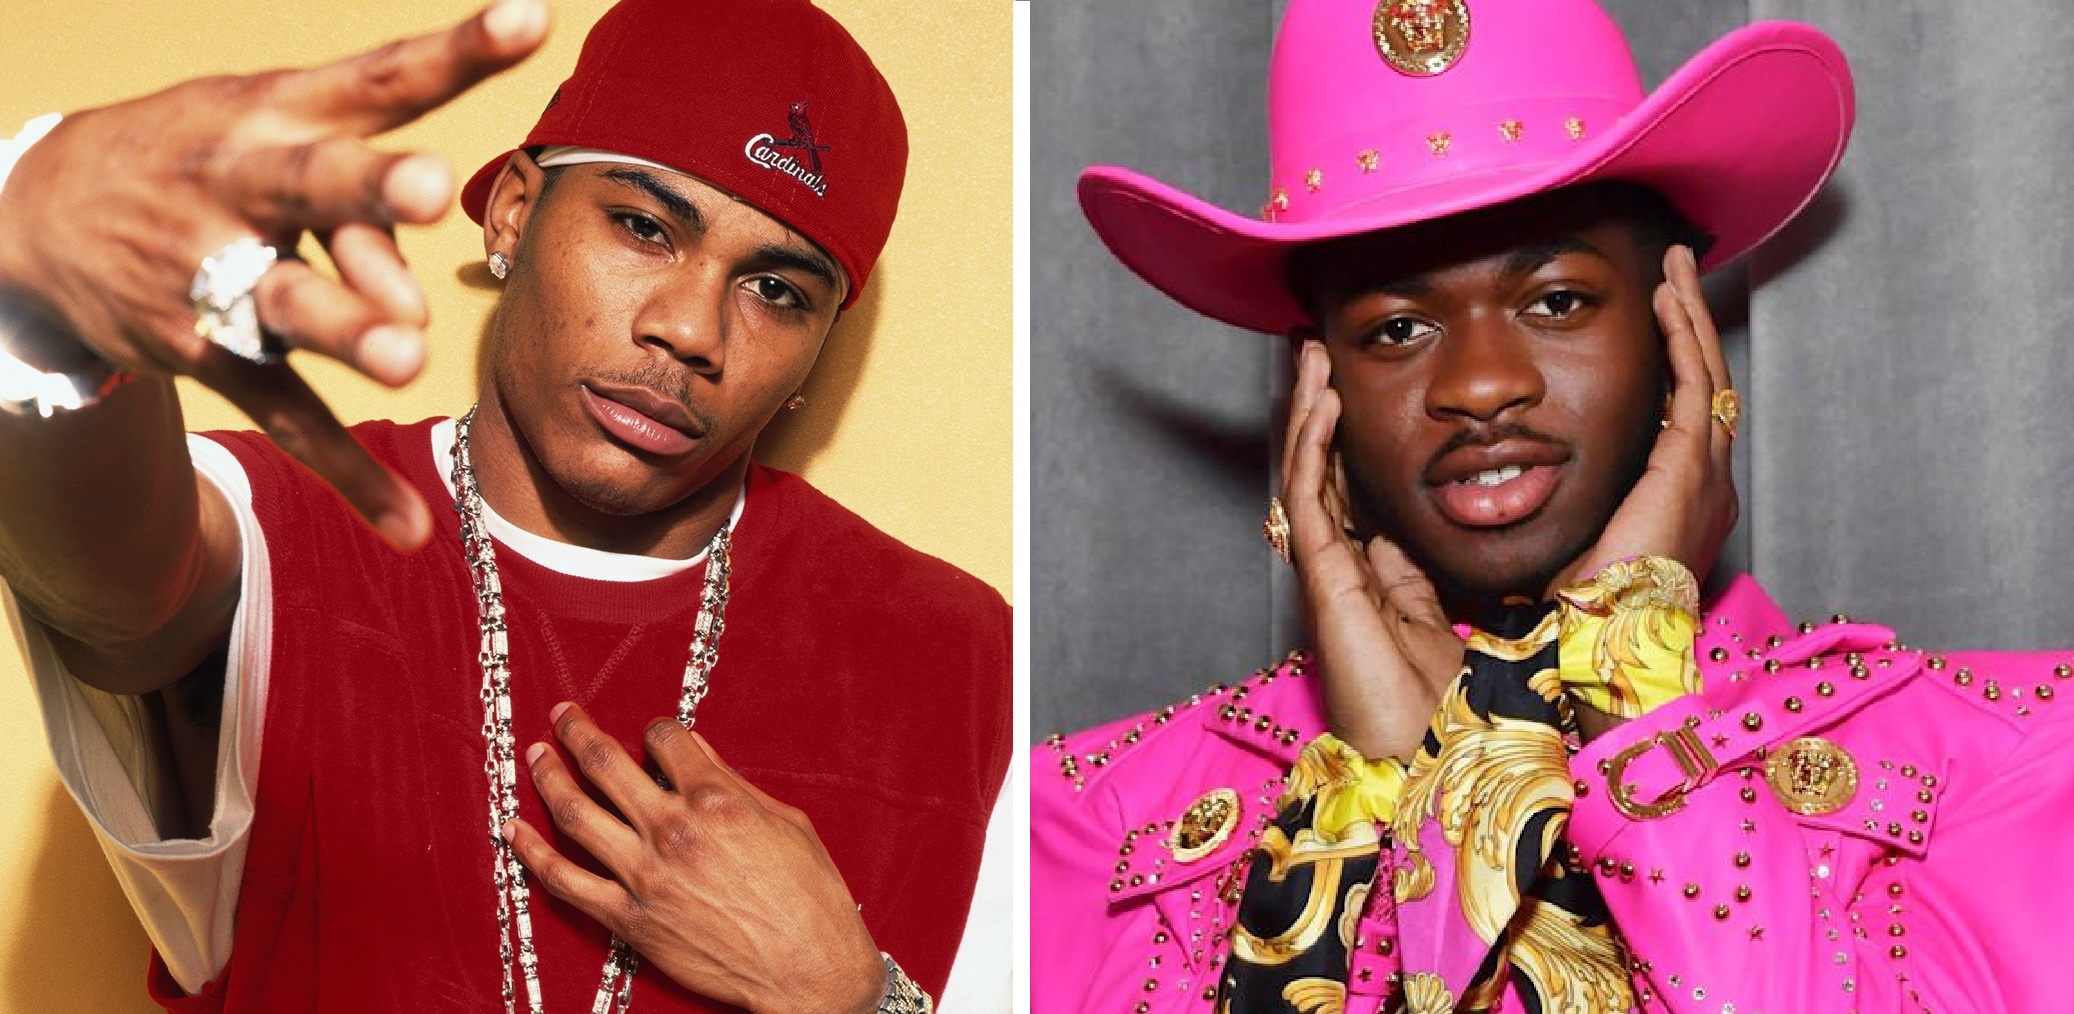 Nelly Showers Praises On Lil Nas X, Says He Loves His Authencity: ‘That’s my little brother and I said it’